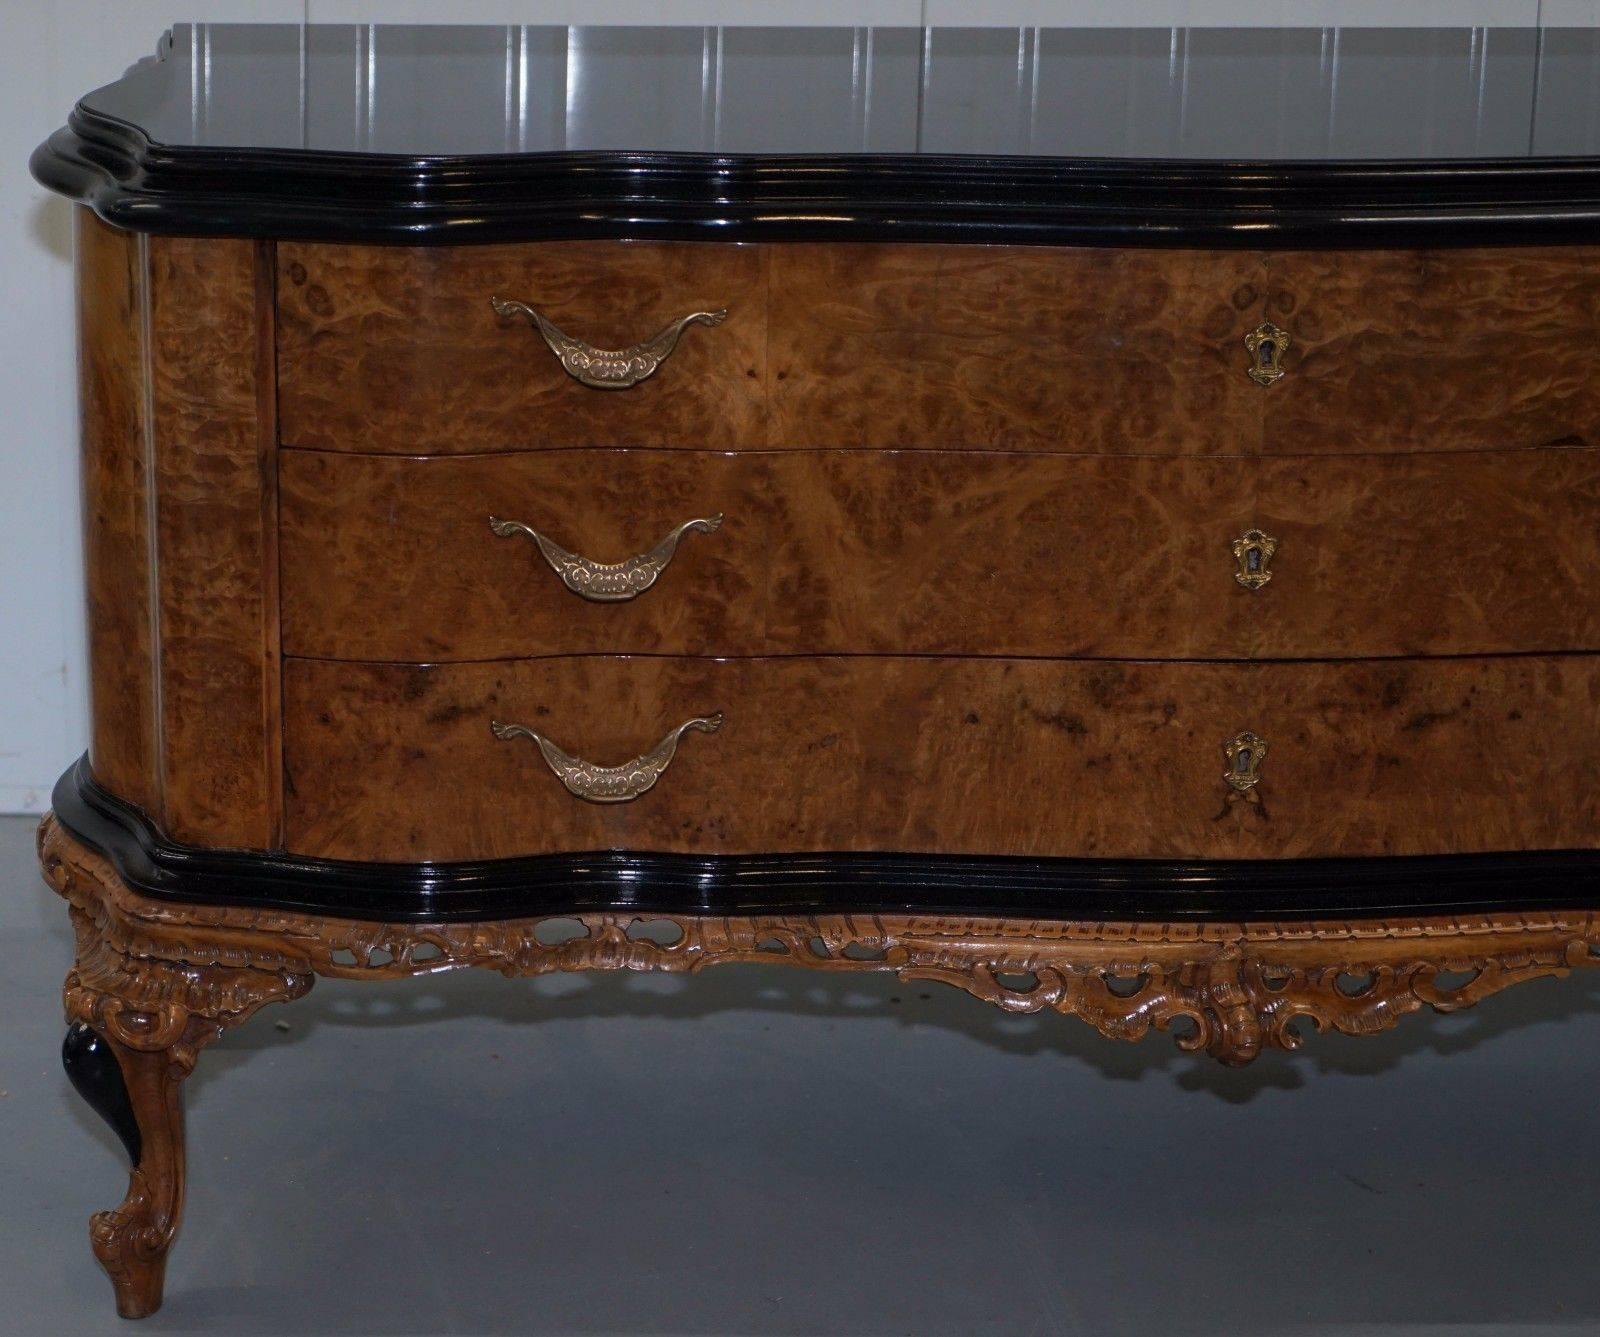 Hand-Carved Stunning Italian Walnut Serpentine Fronted Glass Topped Large Chest of Drawers